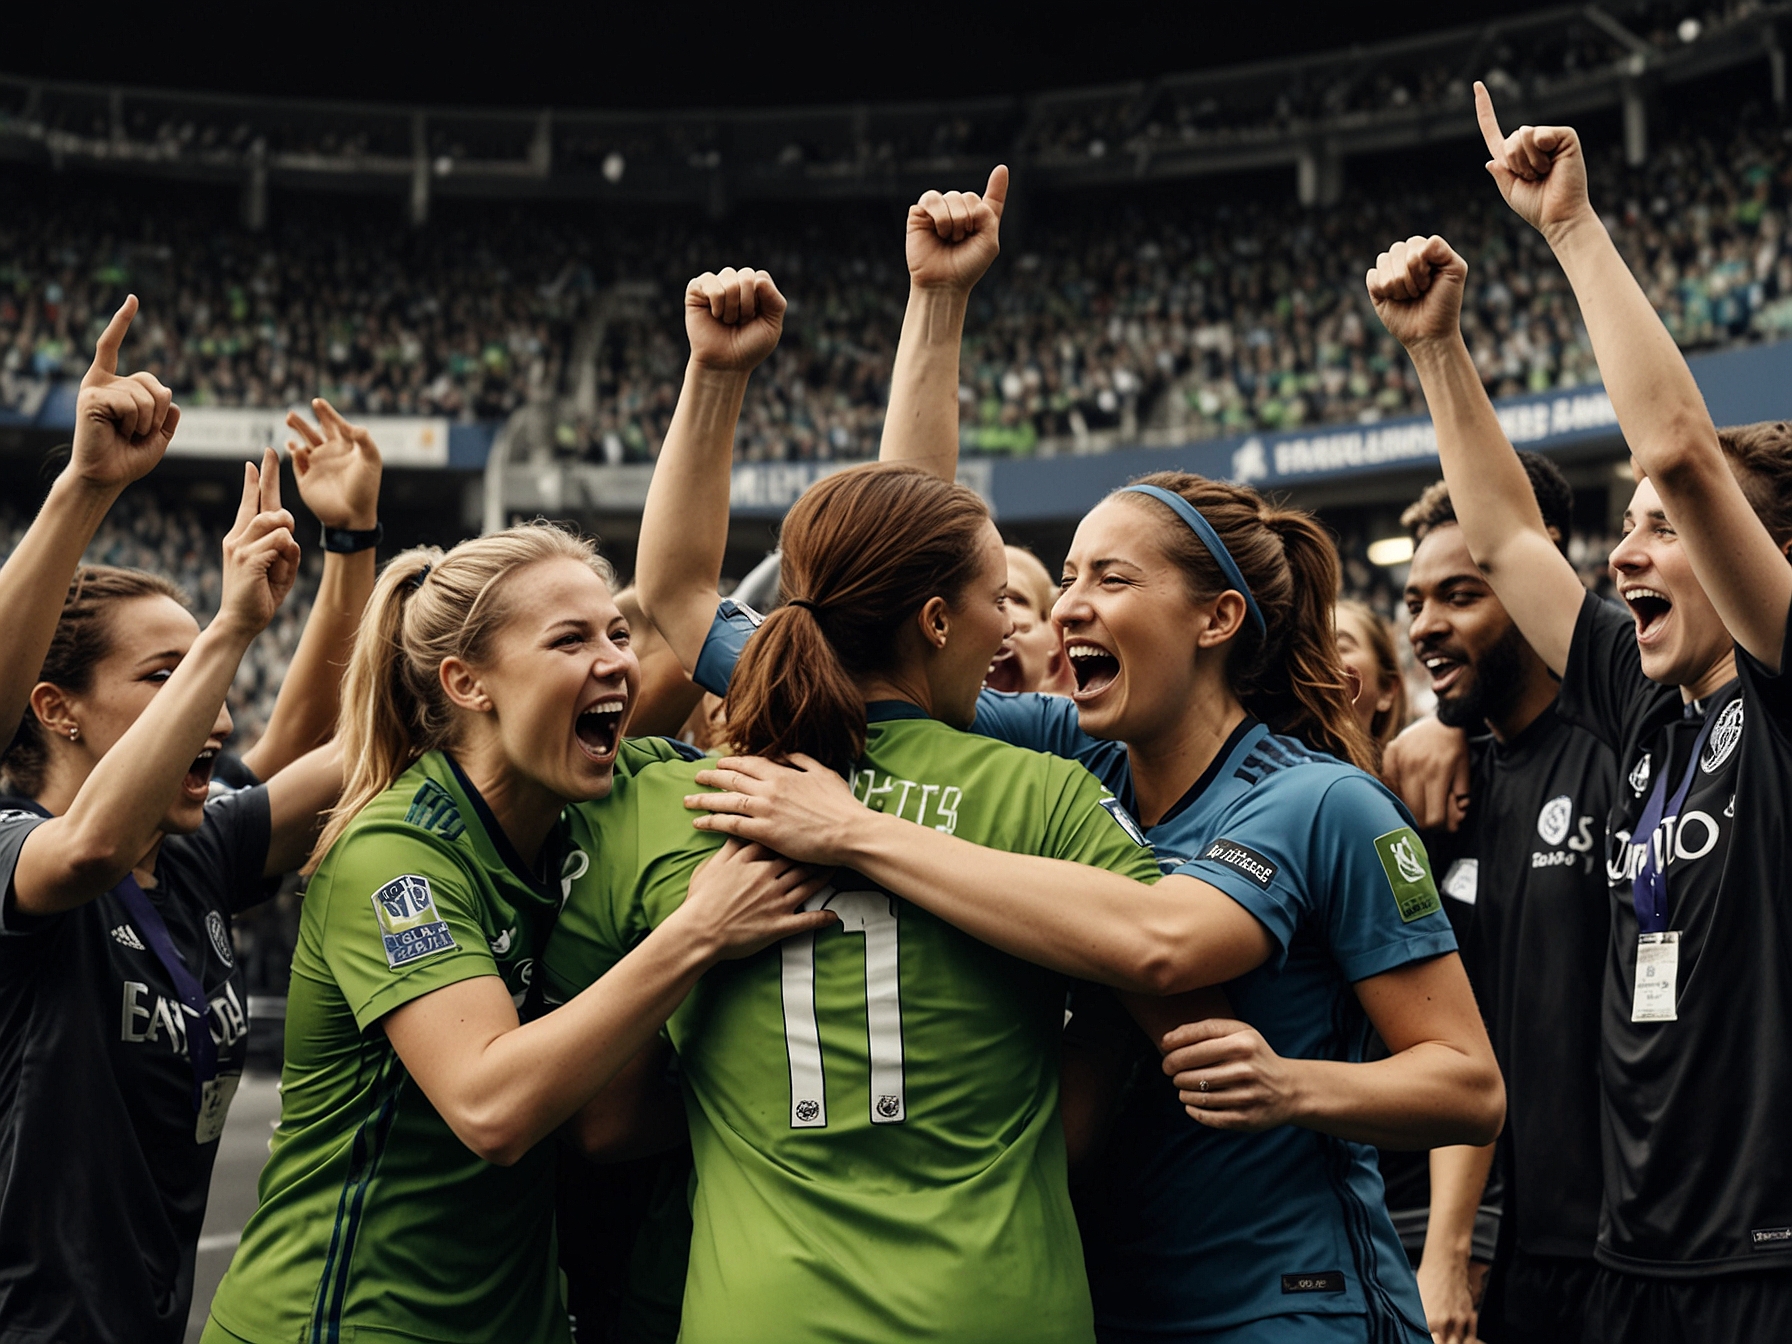 An image showing representatives from Seattle Sounders, Reign FC, and Carlyle celebrating the merger, reflecting excitement and unity among the teams.